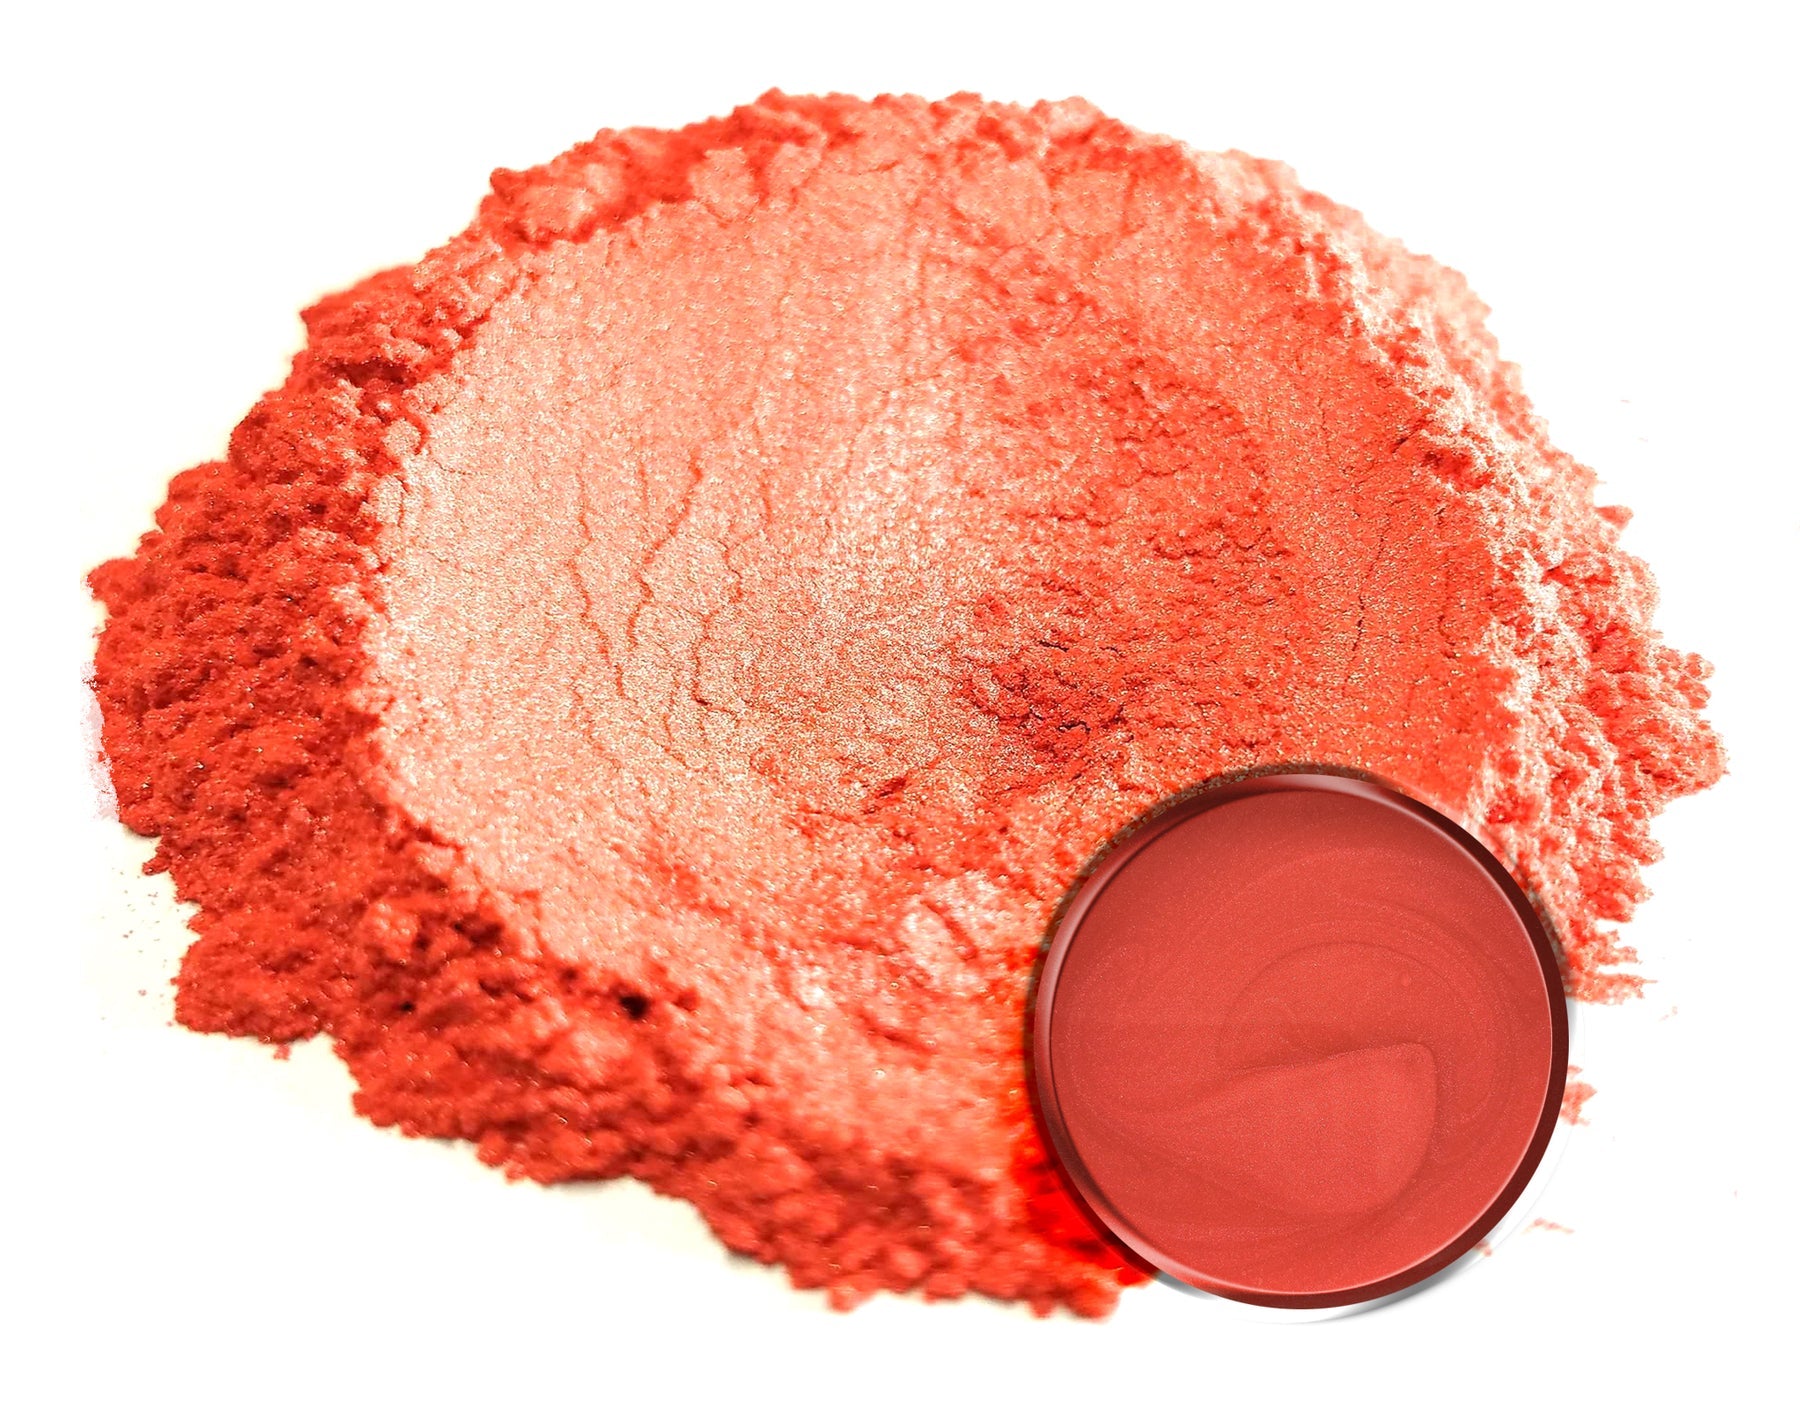 Powdered pigment by eye candy pigments for epoxy resin projects. In the color Carmine.